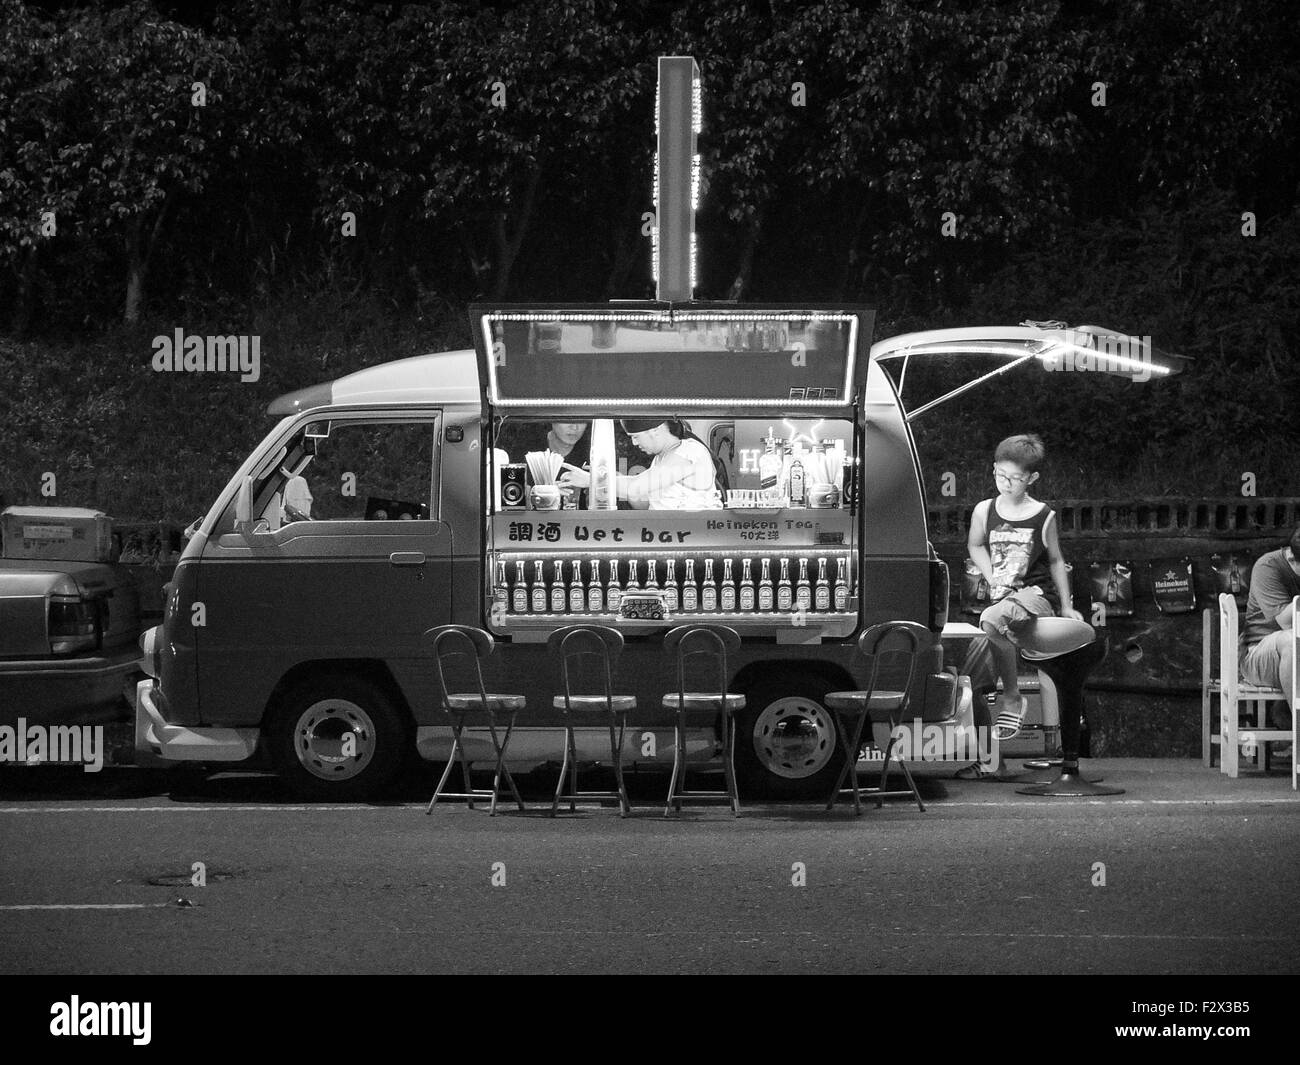 Mobile bar at a night market in Taiwan. Stock Photo